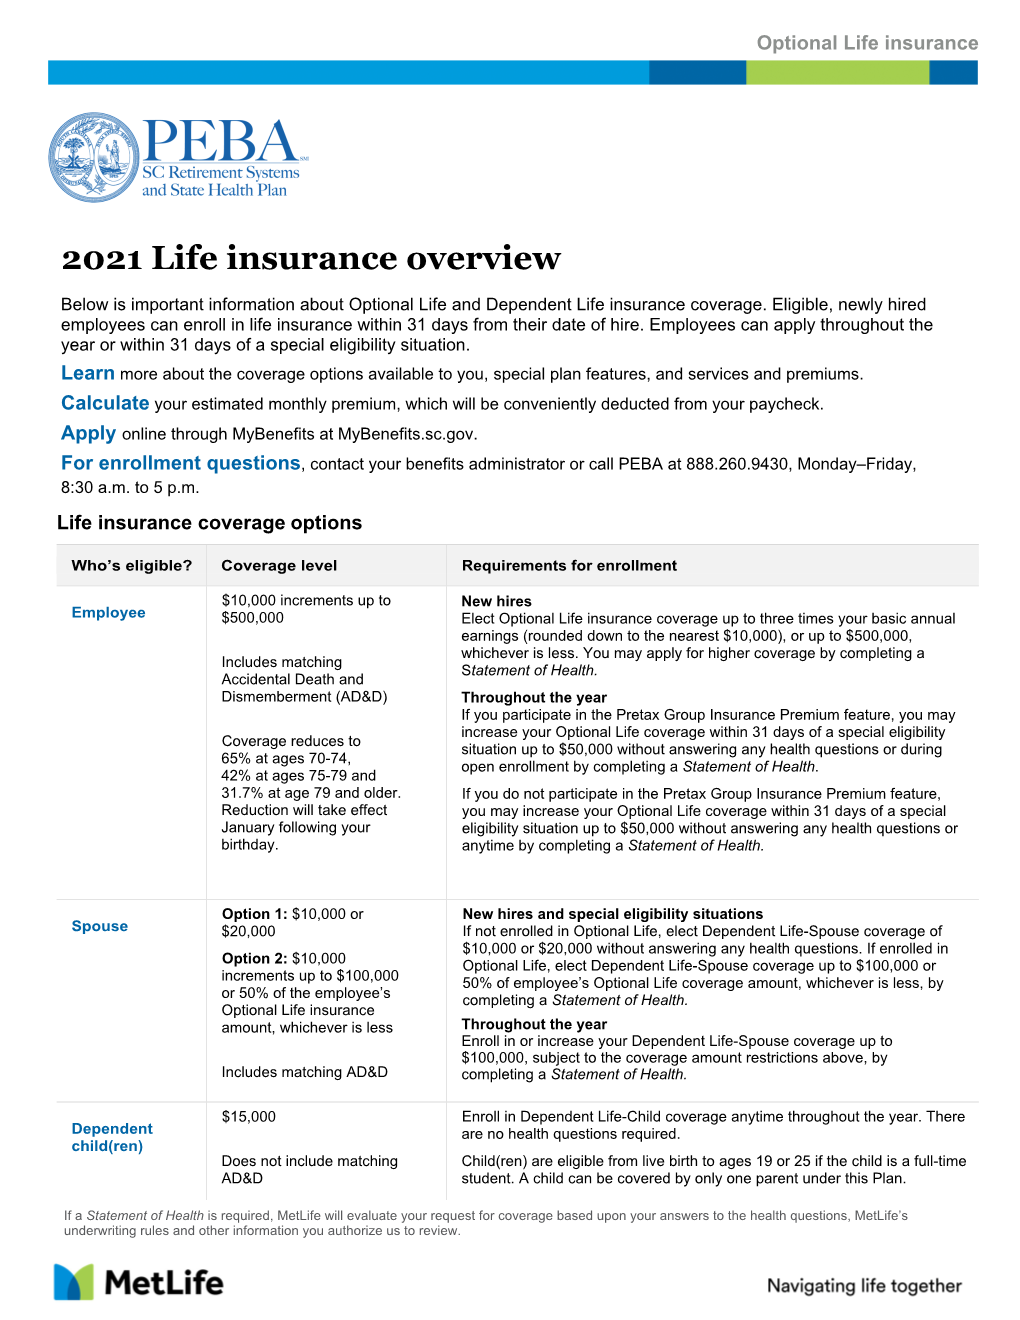 2021 Life Insurance Overview